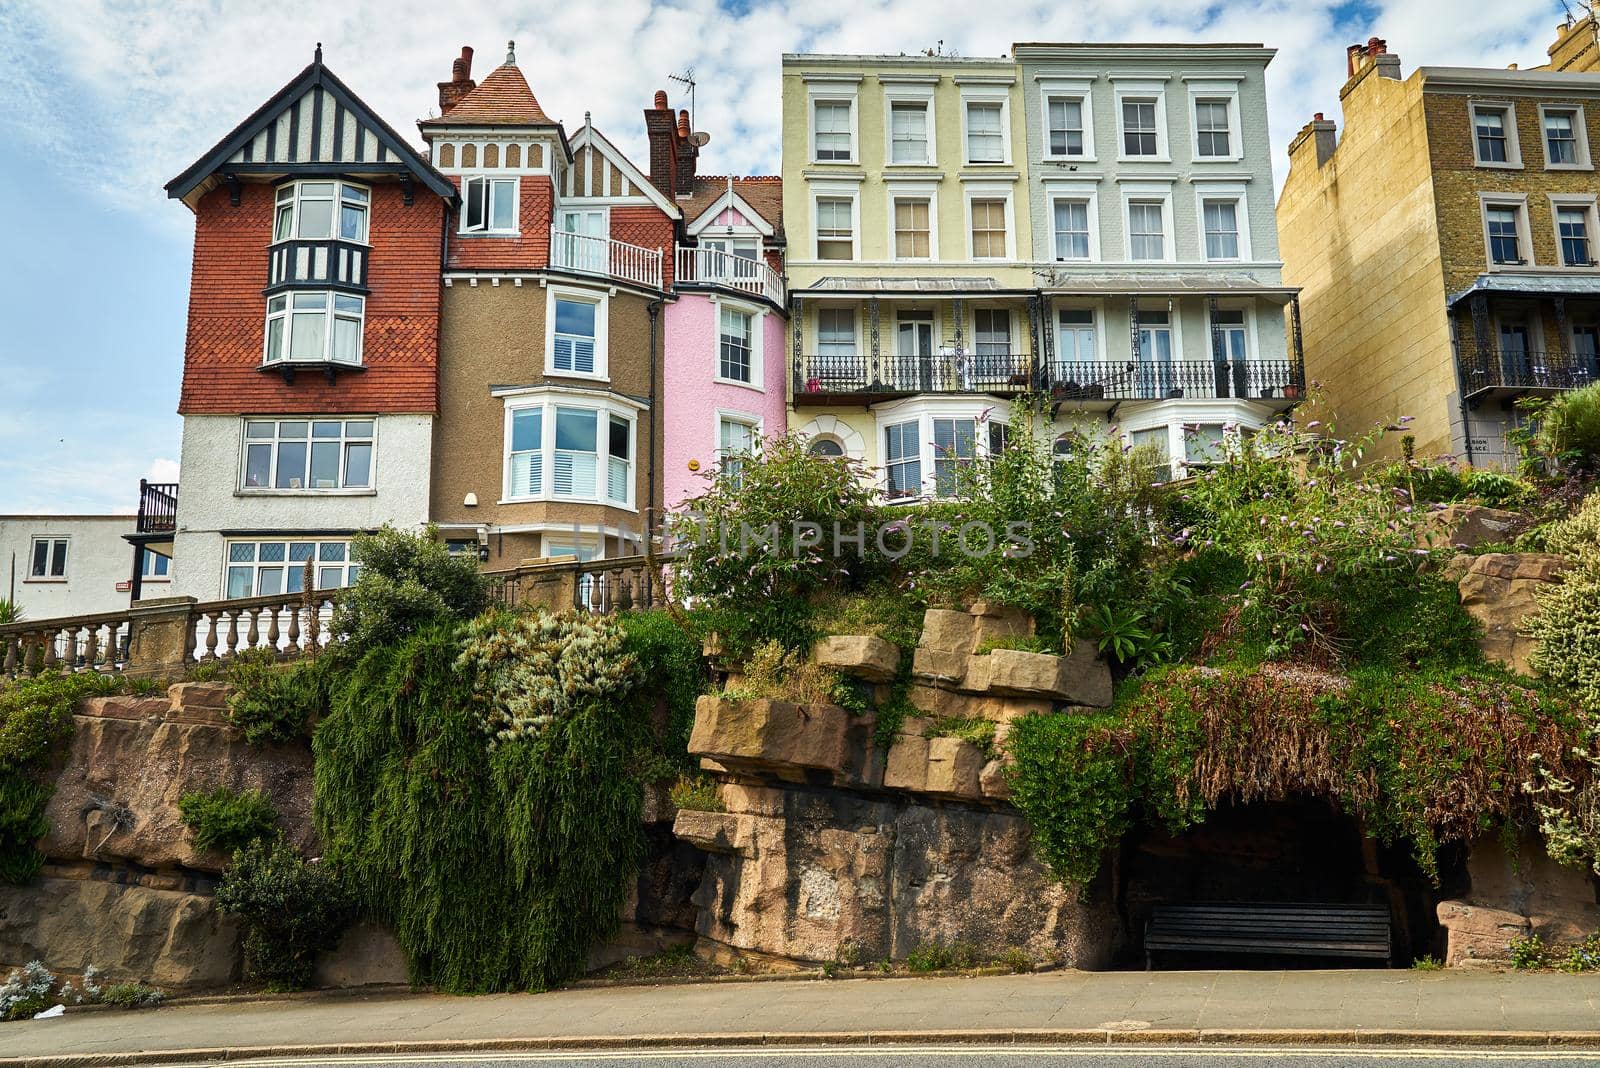 Looking up at houses in Ramsgate, Kent from the winding road Madeira Walk